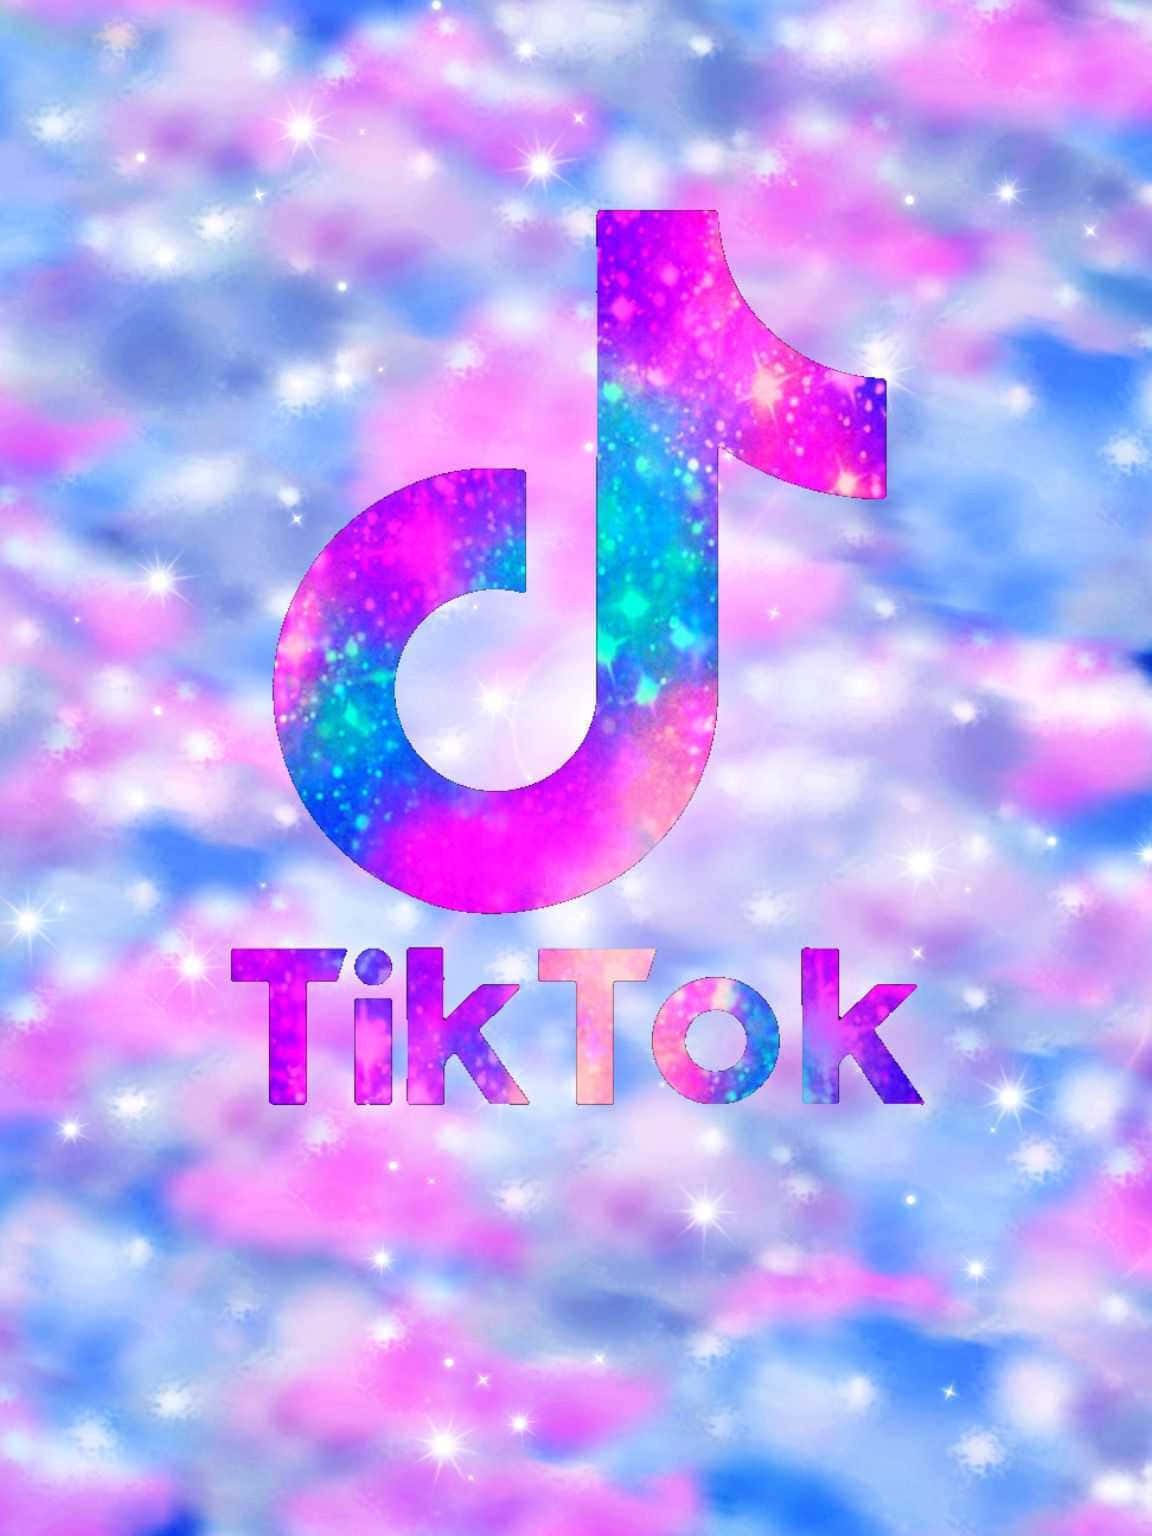 Follow the trends and make it happen on Tiktok